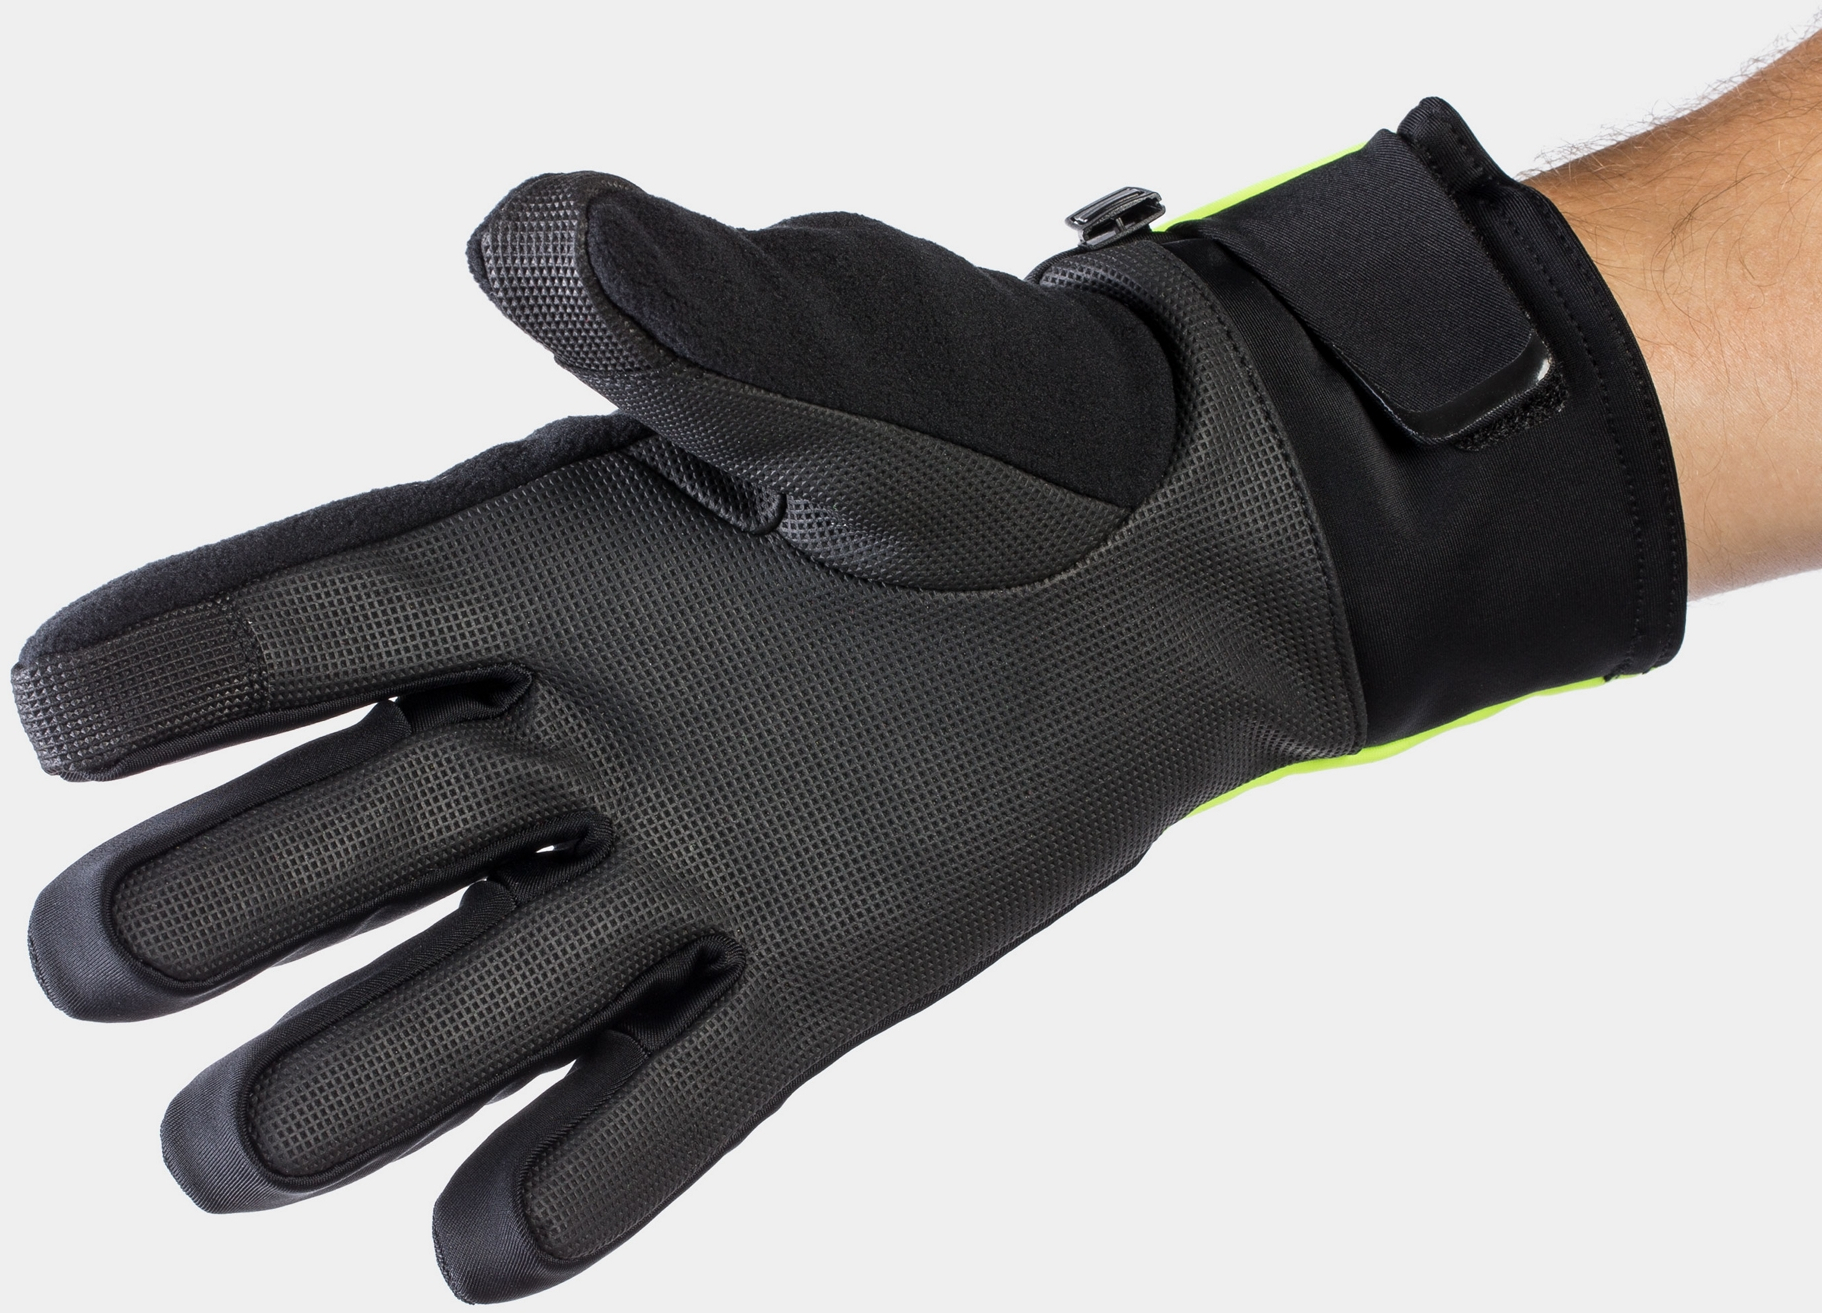 Bontrager Velocis Softshell Cycling Glove - The Edge Cycleworks